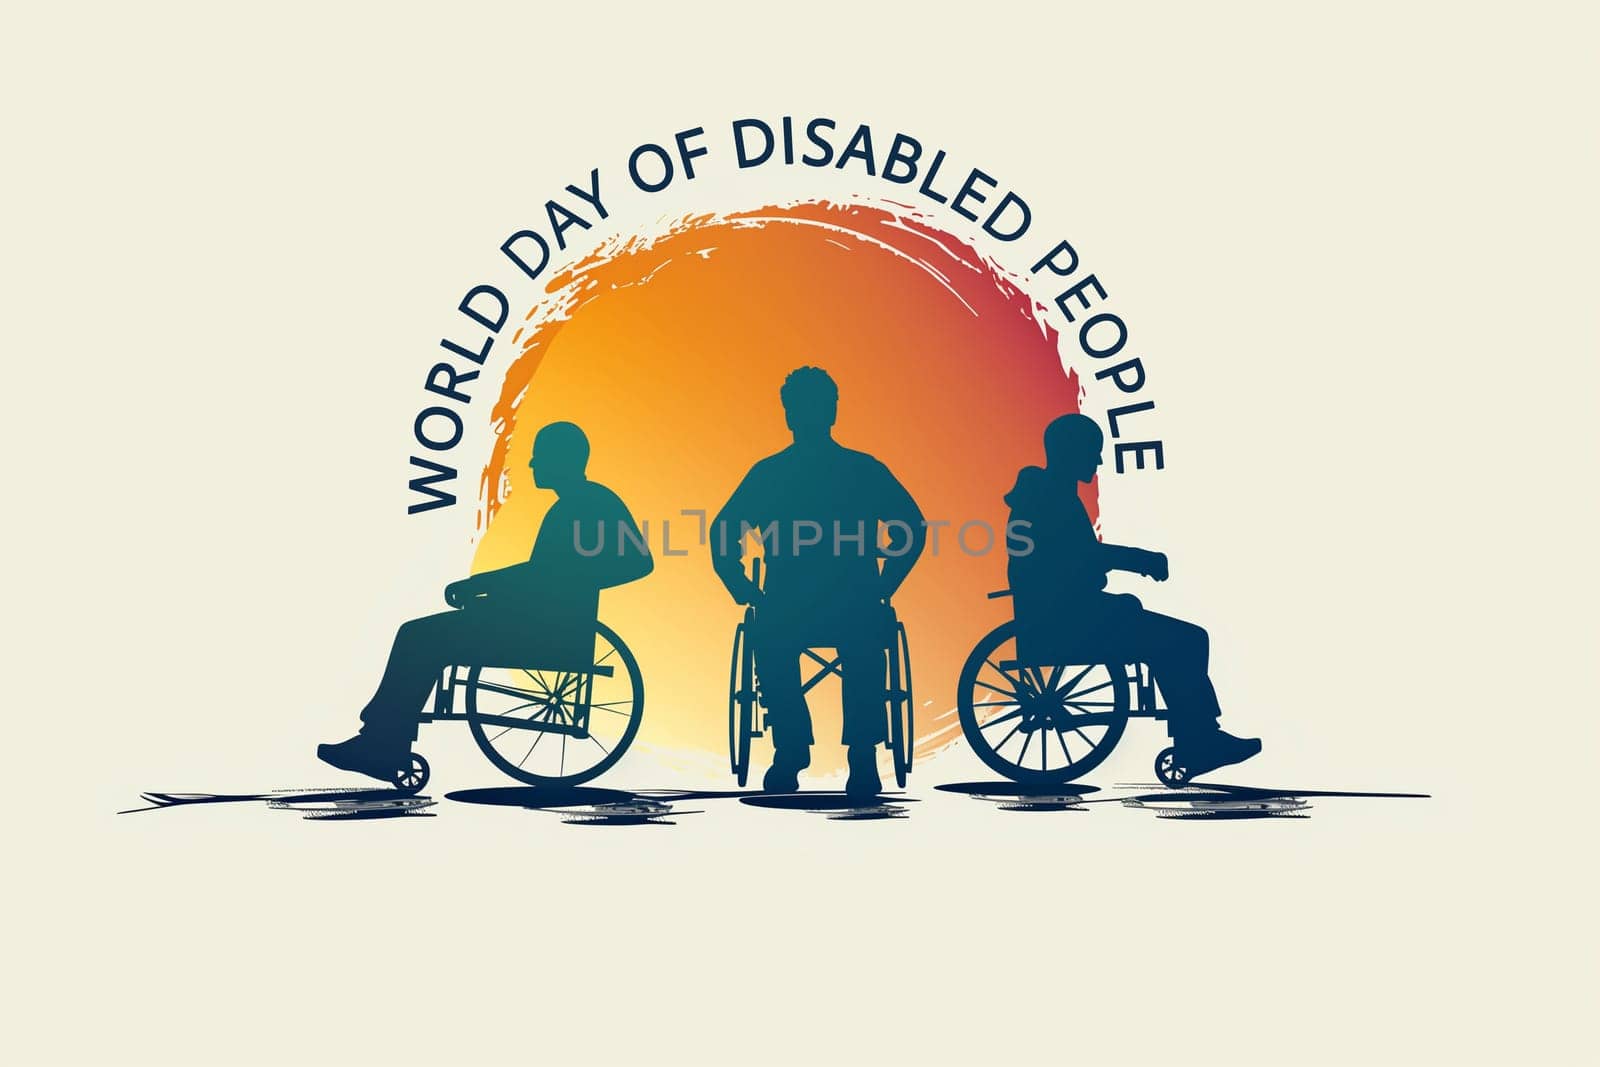 Commemorative Silhouettes of Wheelchair Users on World Day of Disabled People by Sd28DimoN_1976